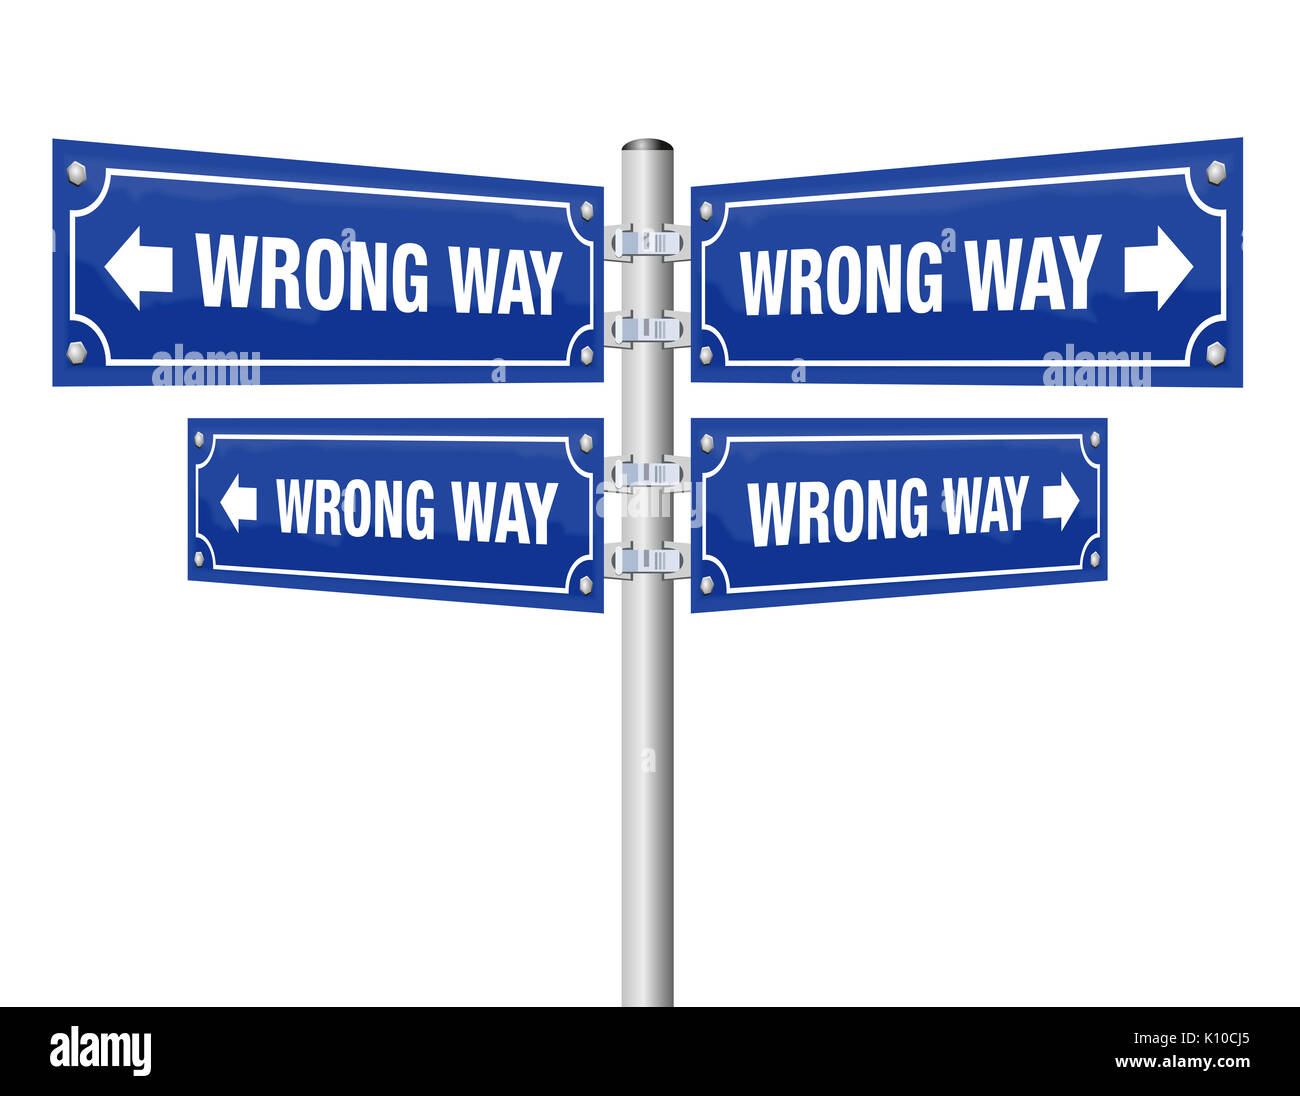 Wrong way guidepost showing in four different directions that lead always to an incorrect destination - symbol for misconduct, pessimism, wrongdoing. Stock Photo